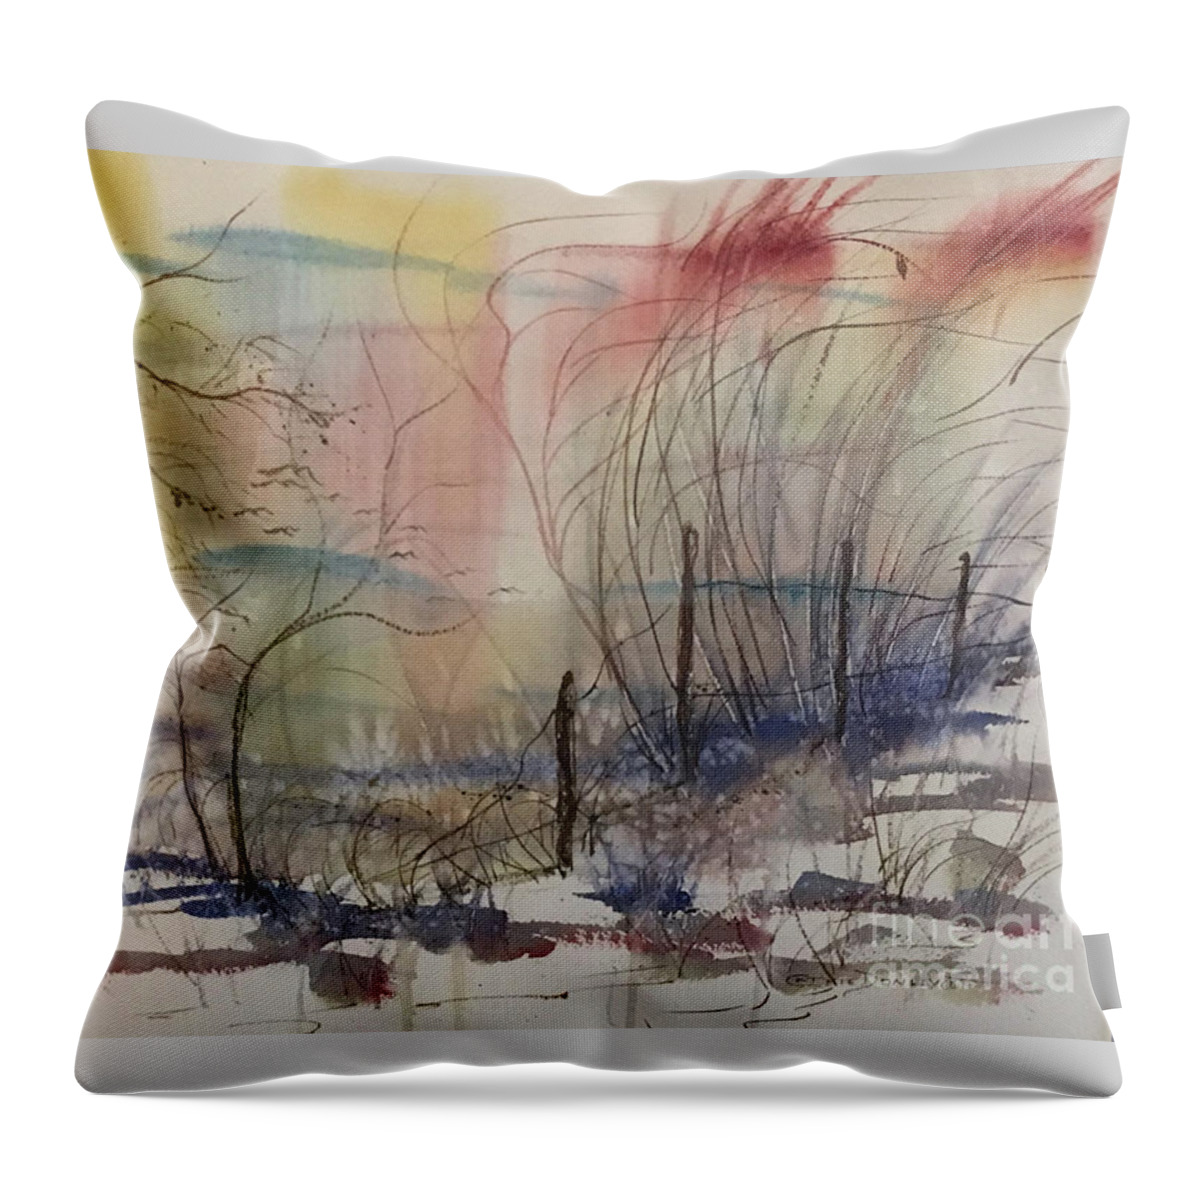 Sailors Throw Pillow featuring the painting Sailors Delight by Catherine Ludwig Donleycott